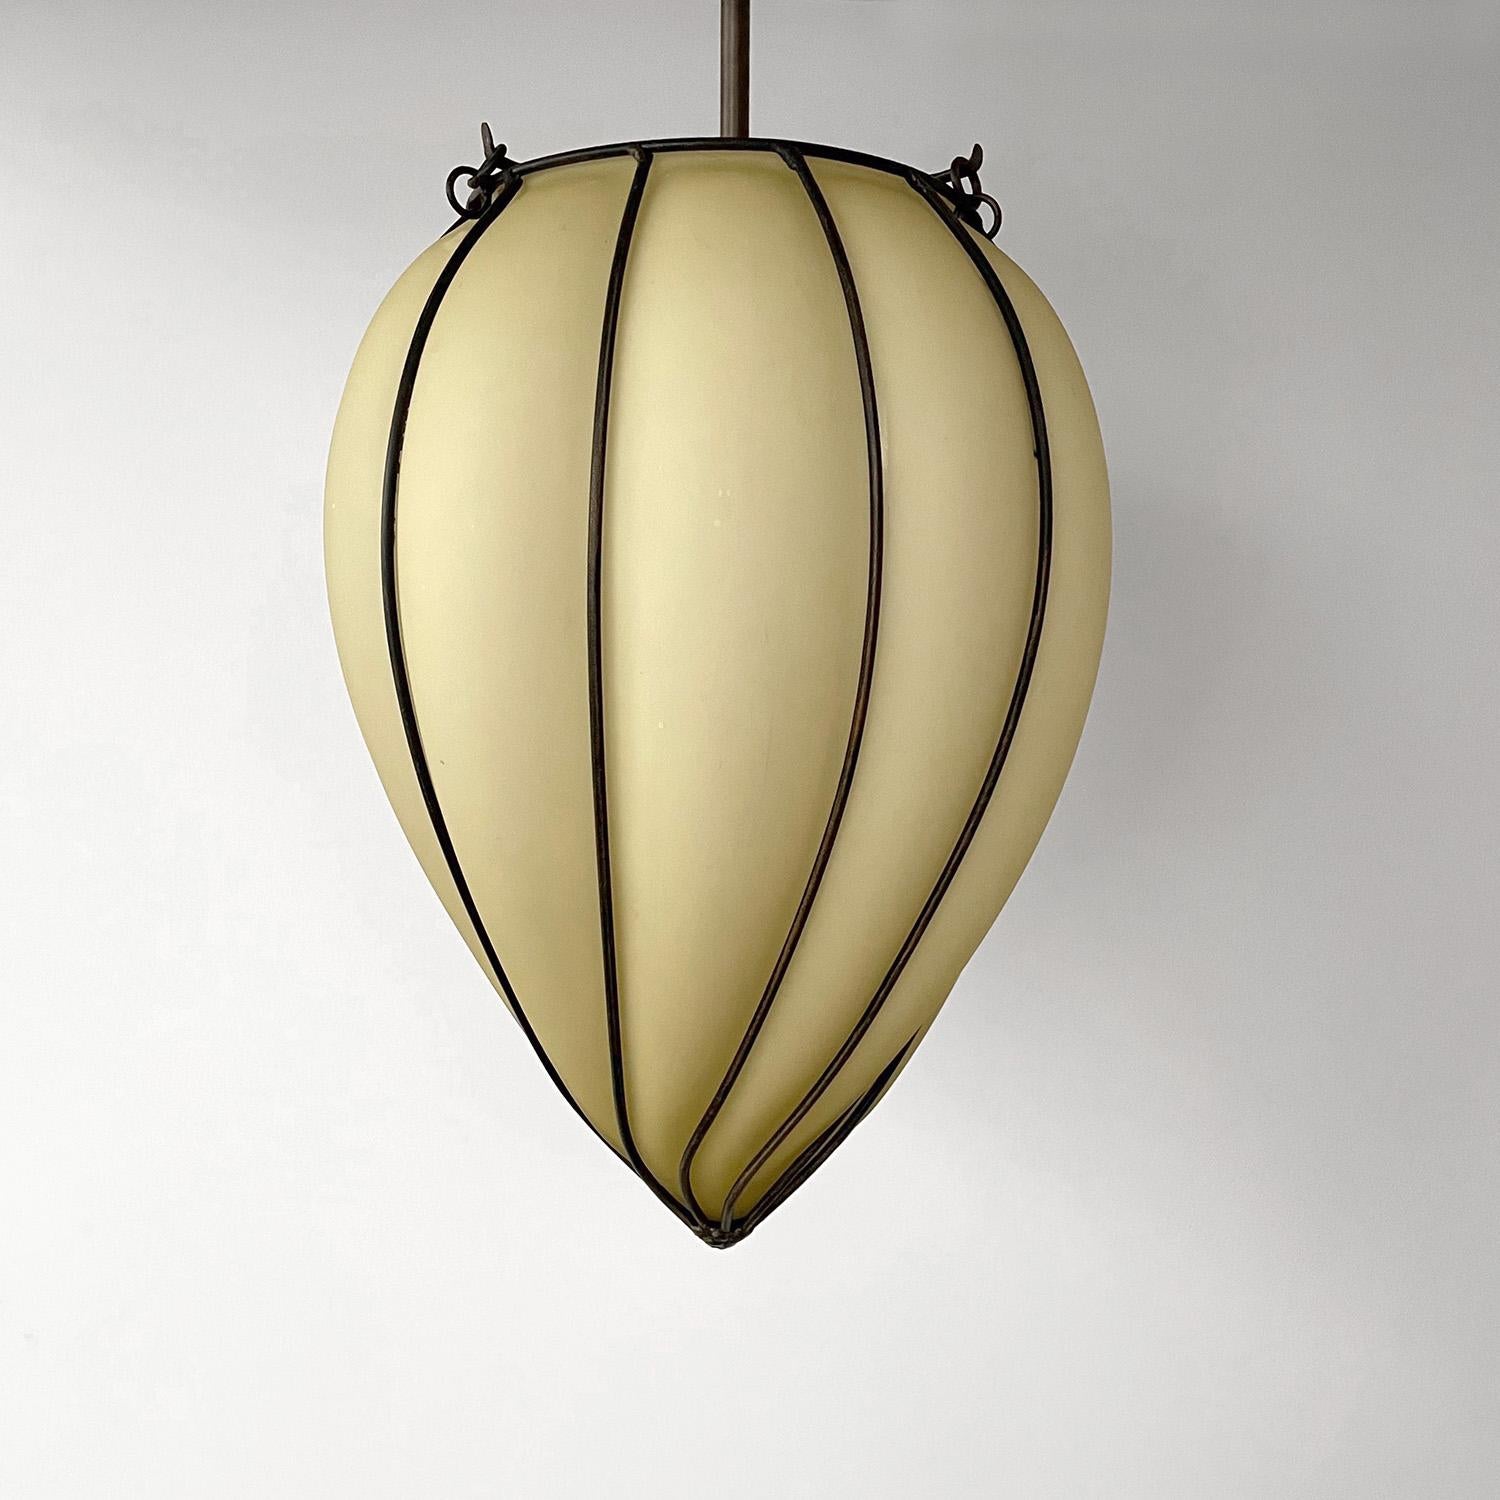 French Art Deco Teardrop Pendant Ceiling Light In Good Condition For Sale In Los Angeles, CA